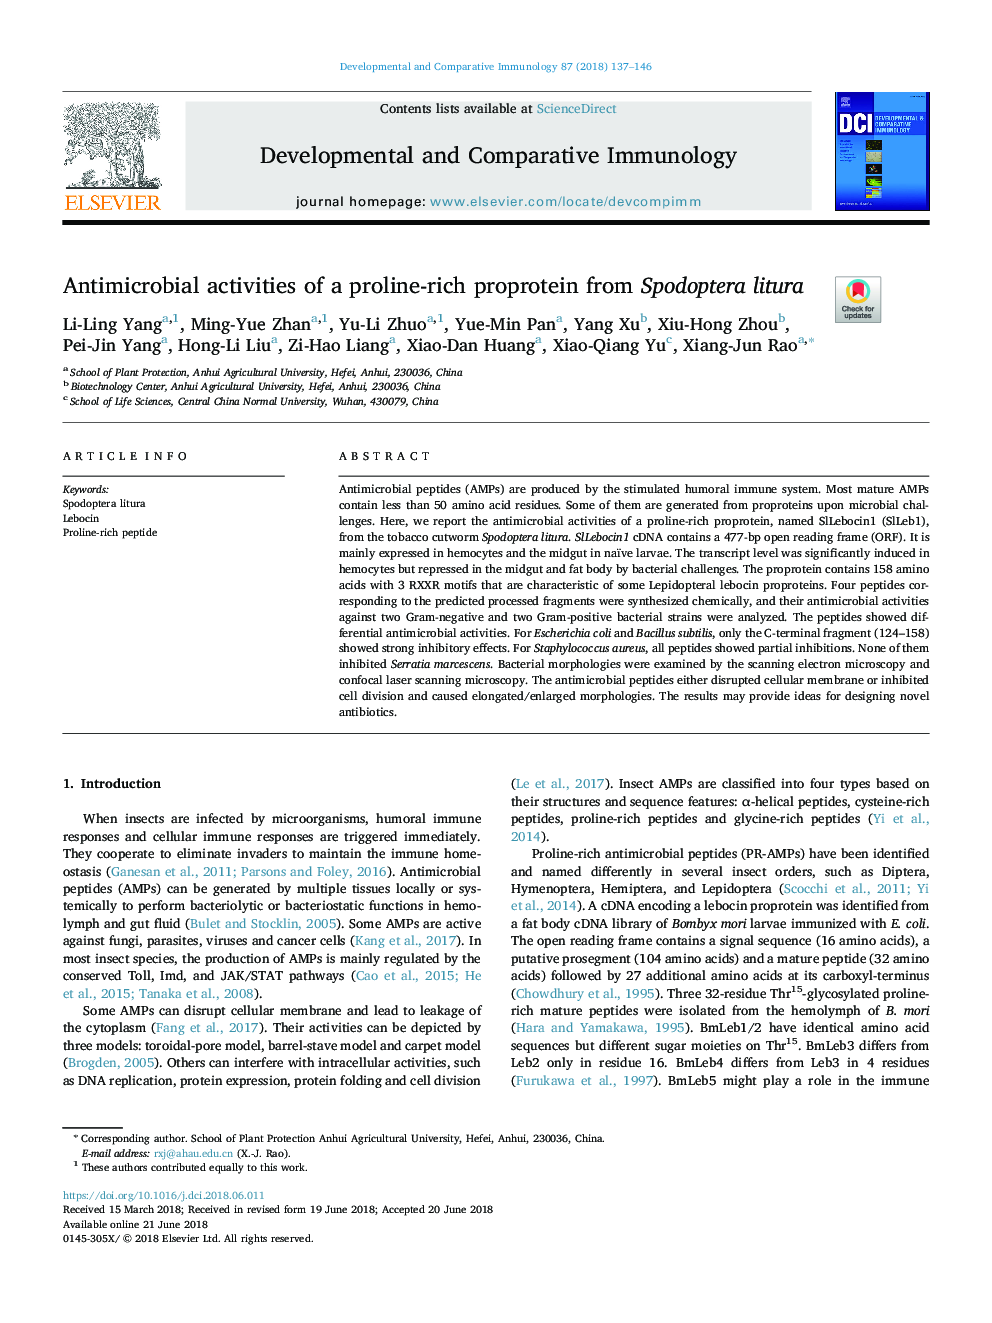 Antimicrobial activities of a proline-rich proprotein from Spodoptera litura